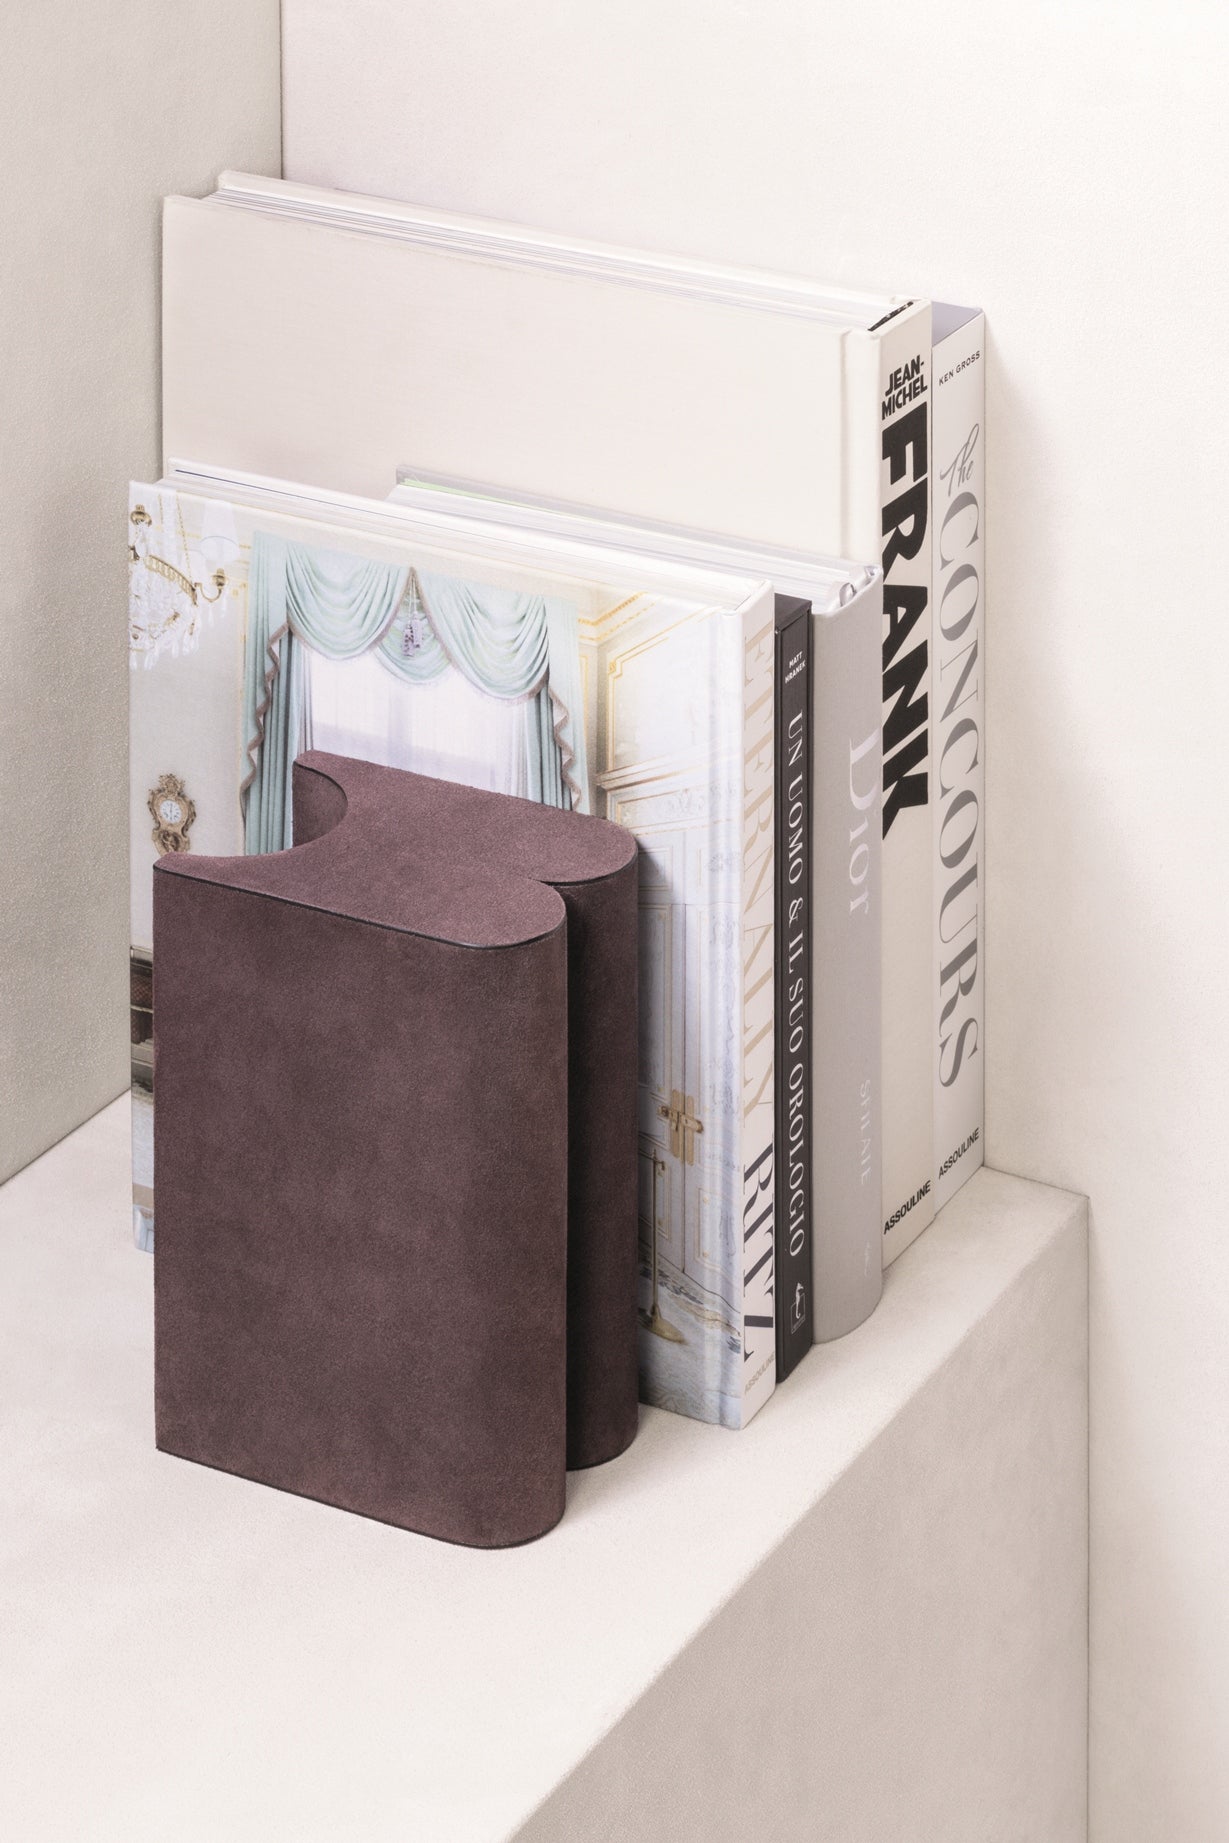 Giobagnara x Stéphane Parmentier Alfabeta Leather-Covered Bookend | Innovative Collaboration with Alfabeta Collection | Geometric Shapes with Leather-Bound Legs | Unique Design with Sculptural Quality | Explore a Range of Luxury Home Accessories at 2Jour Concierge, #1 luxury high-end gift & lifestyle shop